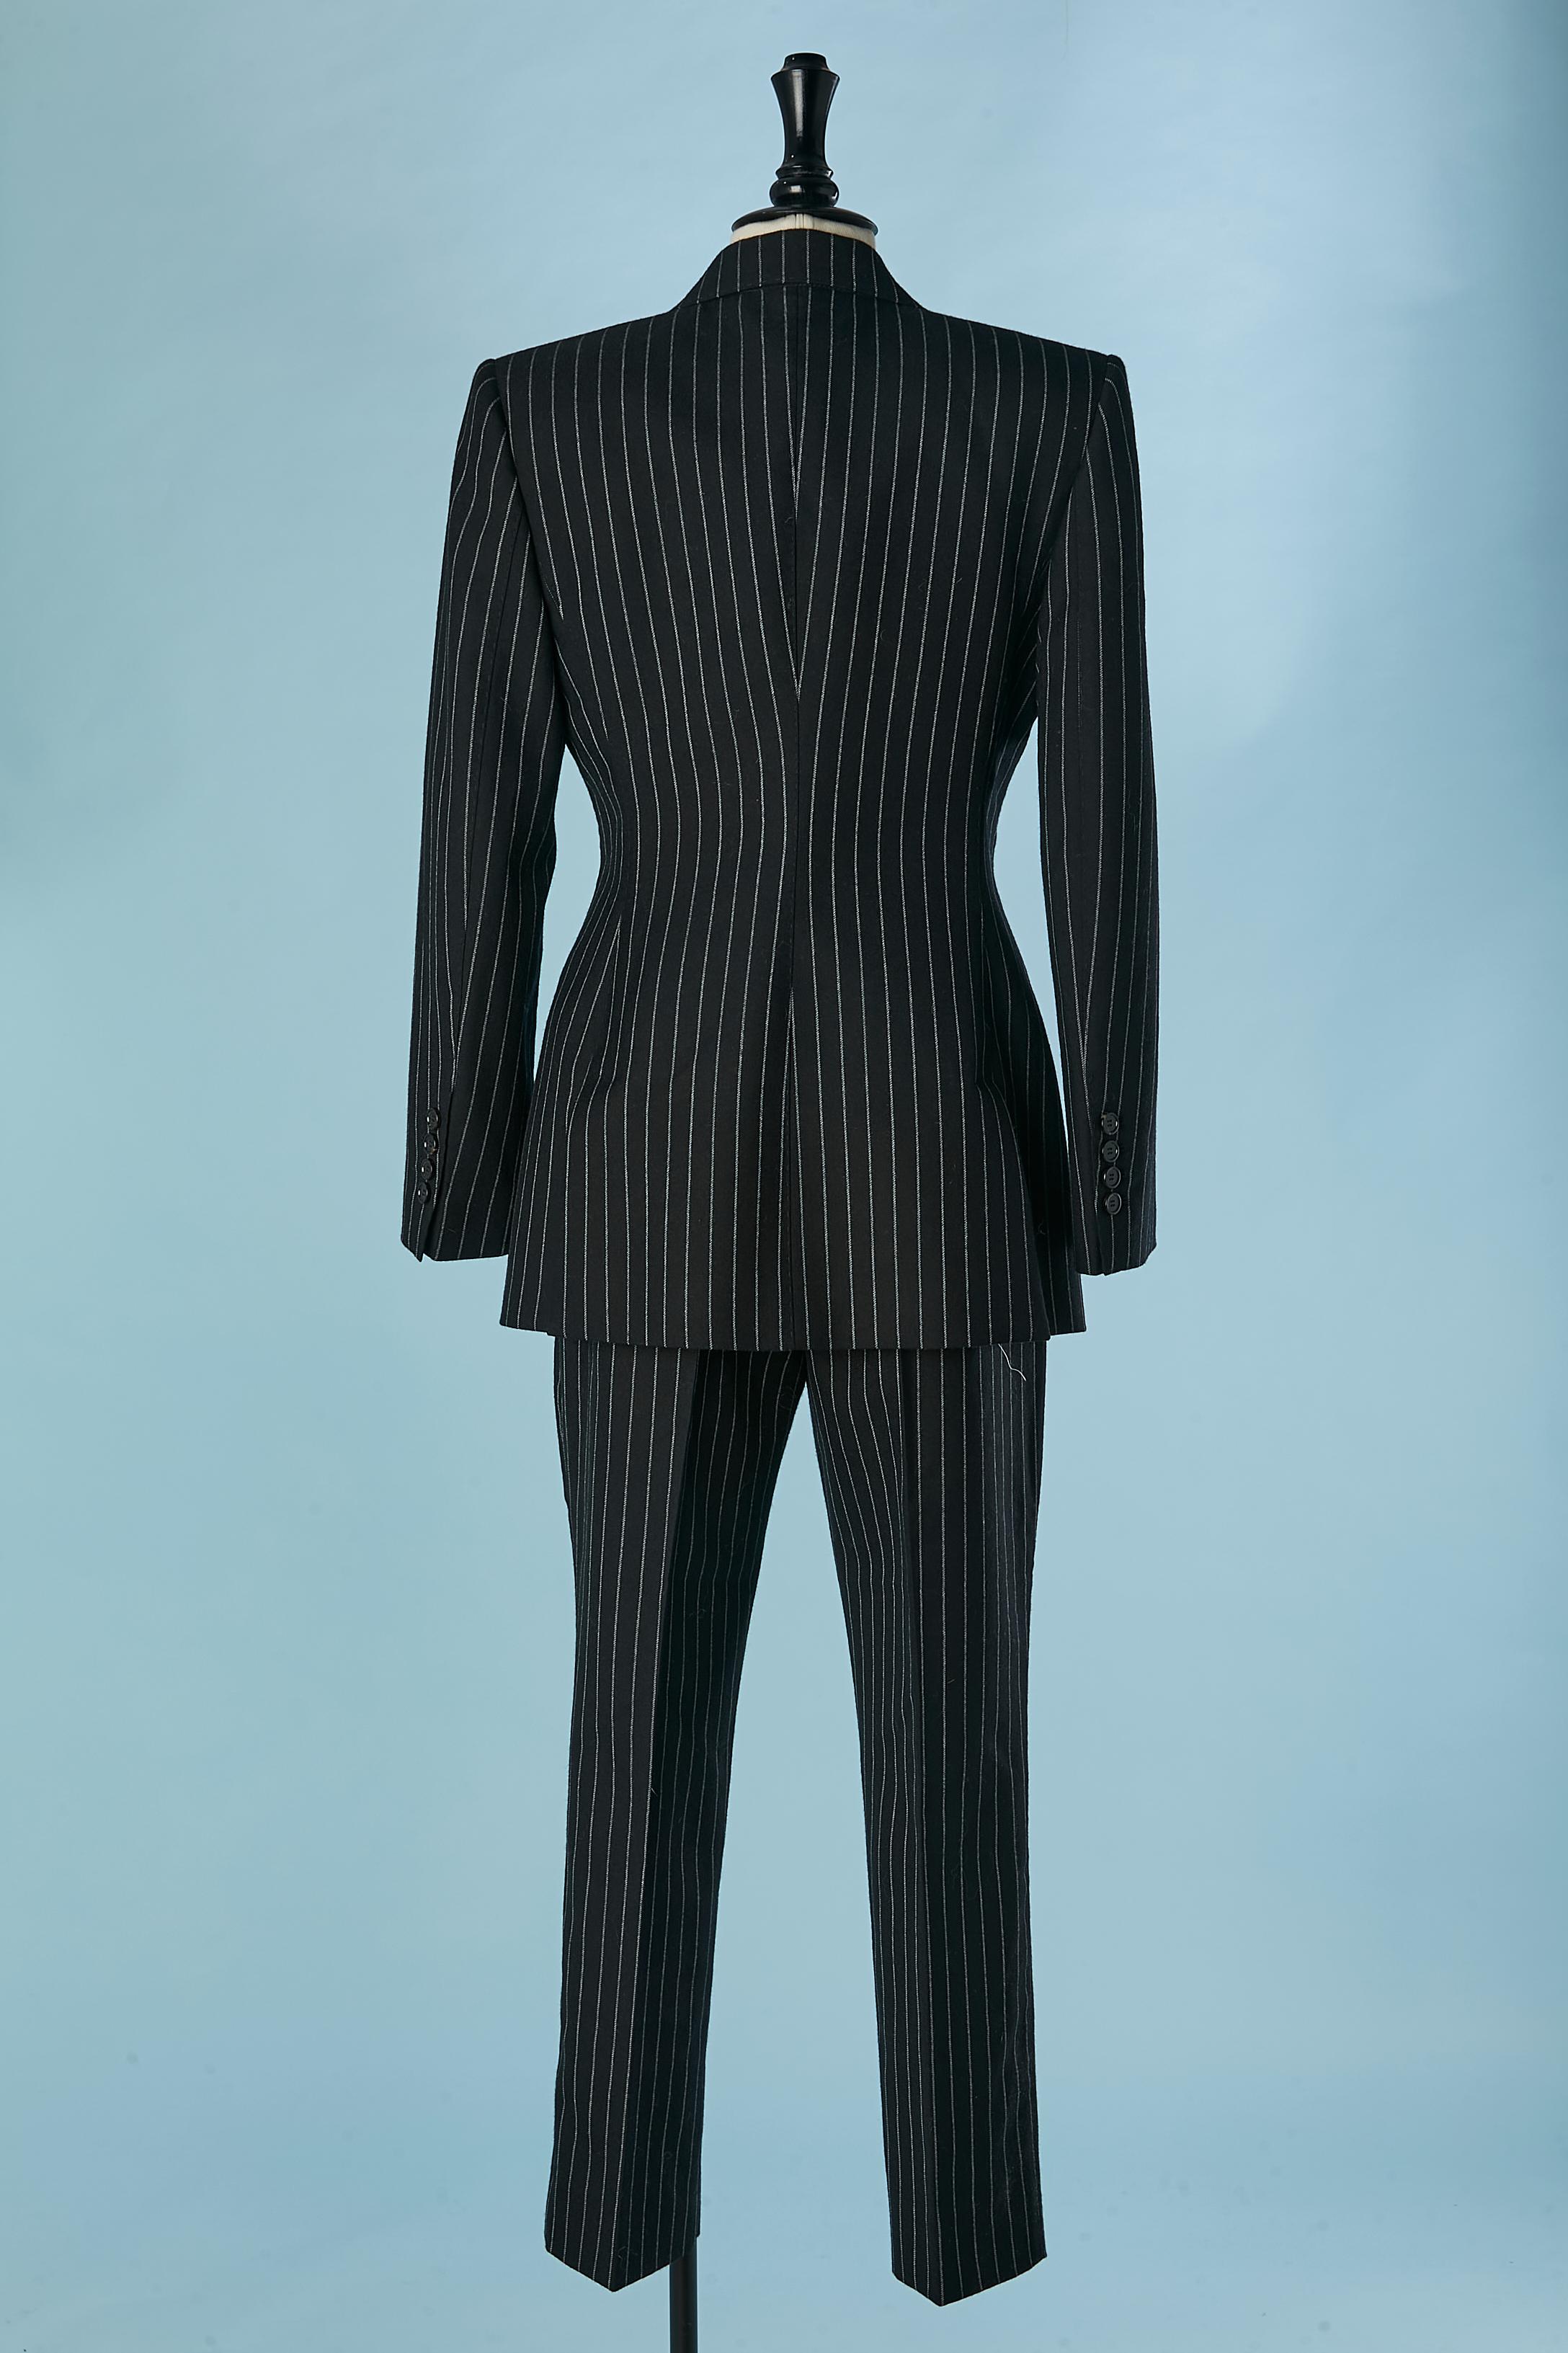 Black and white pin-striped trousers-suit Dolce & Gabbana  1